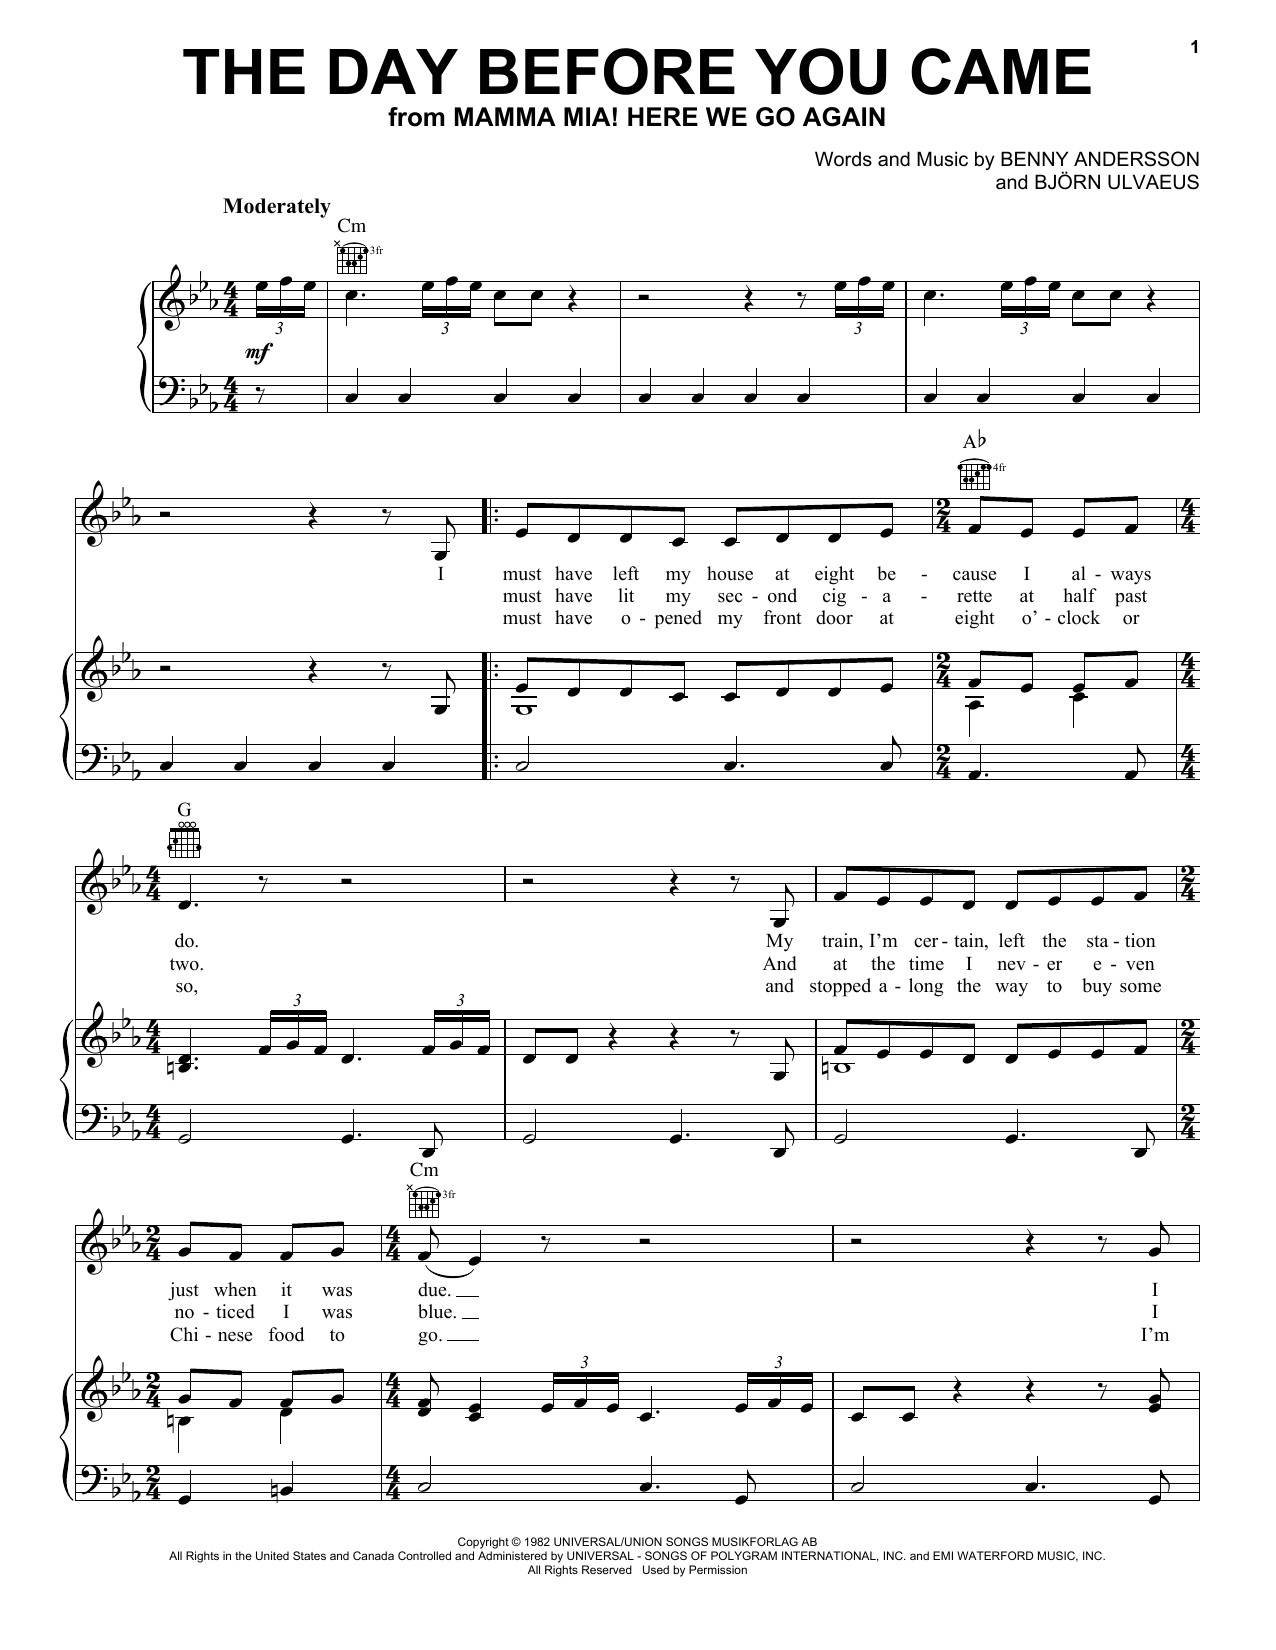 ABBA Day Before You Came (from Mamma Mia! Here We Go Again) sheet music notes and chords. Download Printable PDF.